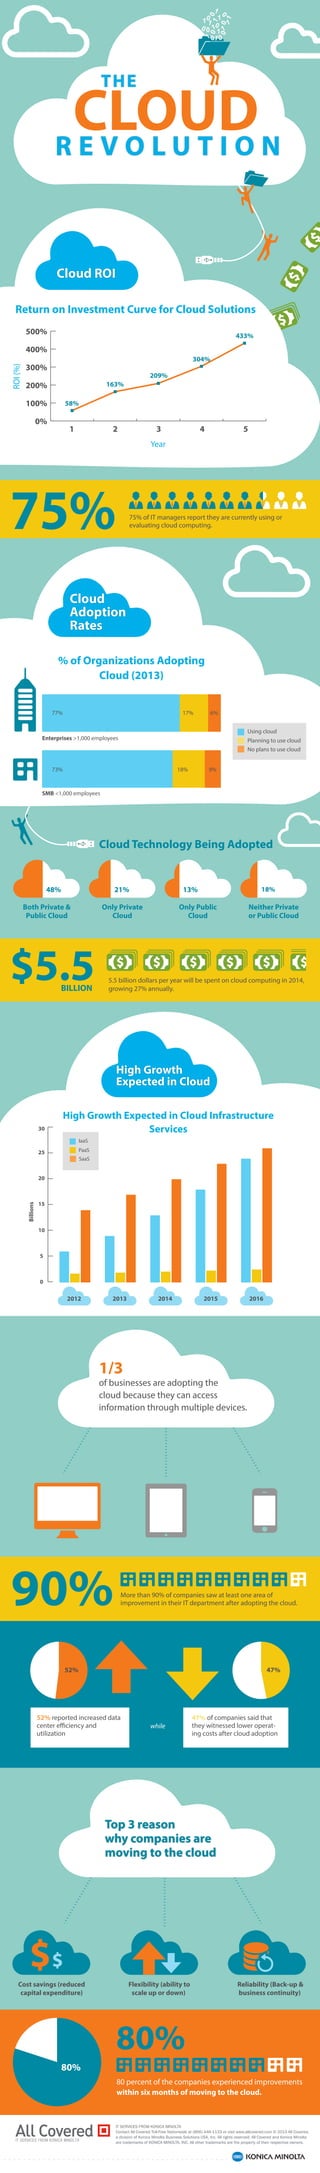 Return on Investment Curve for Cloud Solutions 
58% 
1 
163% 
209% 
304% 
433% 
2 3 4 5 
500% 
400% 
300% 
200% 
100% 
0% 
Year 
Cloud ROI 
75% of IT managers report they are currently using or 
evaluating cloud computing. 
% of Organizations Adopting 
77% 17% 6% 
Enterprises >1,000 employees 
73% 18% 9% 
48% 
Cloud 
Adoption 
Rates 
Both Private & 
Public Cloud 
Cloud (2013) 
Using cloud 
Planning to use cloud 
No plans to use cloud 
Cloud Technology Being Adopted 
21% 
Only Private 
Cloud 
13% 18% 
Neither Private 
or Public Cloud 
Only Public 
Cloud 
High Growth Expected in Cloud Infrastructure 
IaaS 
PaaS 
SaaS 
52% 47% 
52% reported increased data 
center eciency and 
utilization 
Cost savings (reduced 
capital expenditure) 
5.5 billion dollars per year will be spent on cloud computing in 2014, 
growing 27% annually. 
Services 
while 
Top 3 reason 
why companies are 
moving to the cloud 
Flexibility (ability to 
scale up or down) 
47% of companies said that 
they witnessed lower operat-ing 
costs after cloud adoption 
Reliability (Back-up  
business continuity) 
IT SERVICES FROM KONICA MINOLTA 
Contact All Covered Toll-Free Nationwide at (866) 446-1133 or visit www.allcovered.com © 2013 All Covered, 
a division of Konica Minolta Business Solutions USA, Inc. All rights reserved. All Covered and Konica Minolta 
are trademarks of KONICA MINOLTA, INC. All other trademarks are the property of their respective owners. 
SMB 1,000 employees 
High Growth 
Expected in Cloud 
2012 2013 2014 2015 2016 
1/3 
of businesses are adopting the 
cloud because they can access 
information through multiple devices. 
More than 90% of companies saw at least one area of 
improvement in their IT department after adopting the cloud. 
80 percent of the companies experienced improvements 
within six months of moving to the cloud. 
